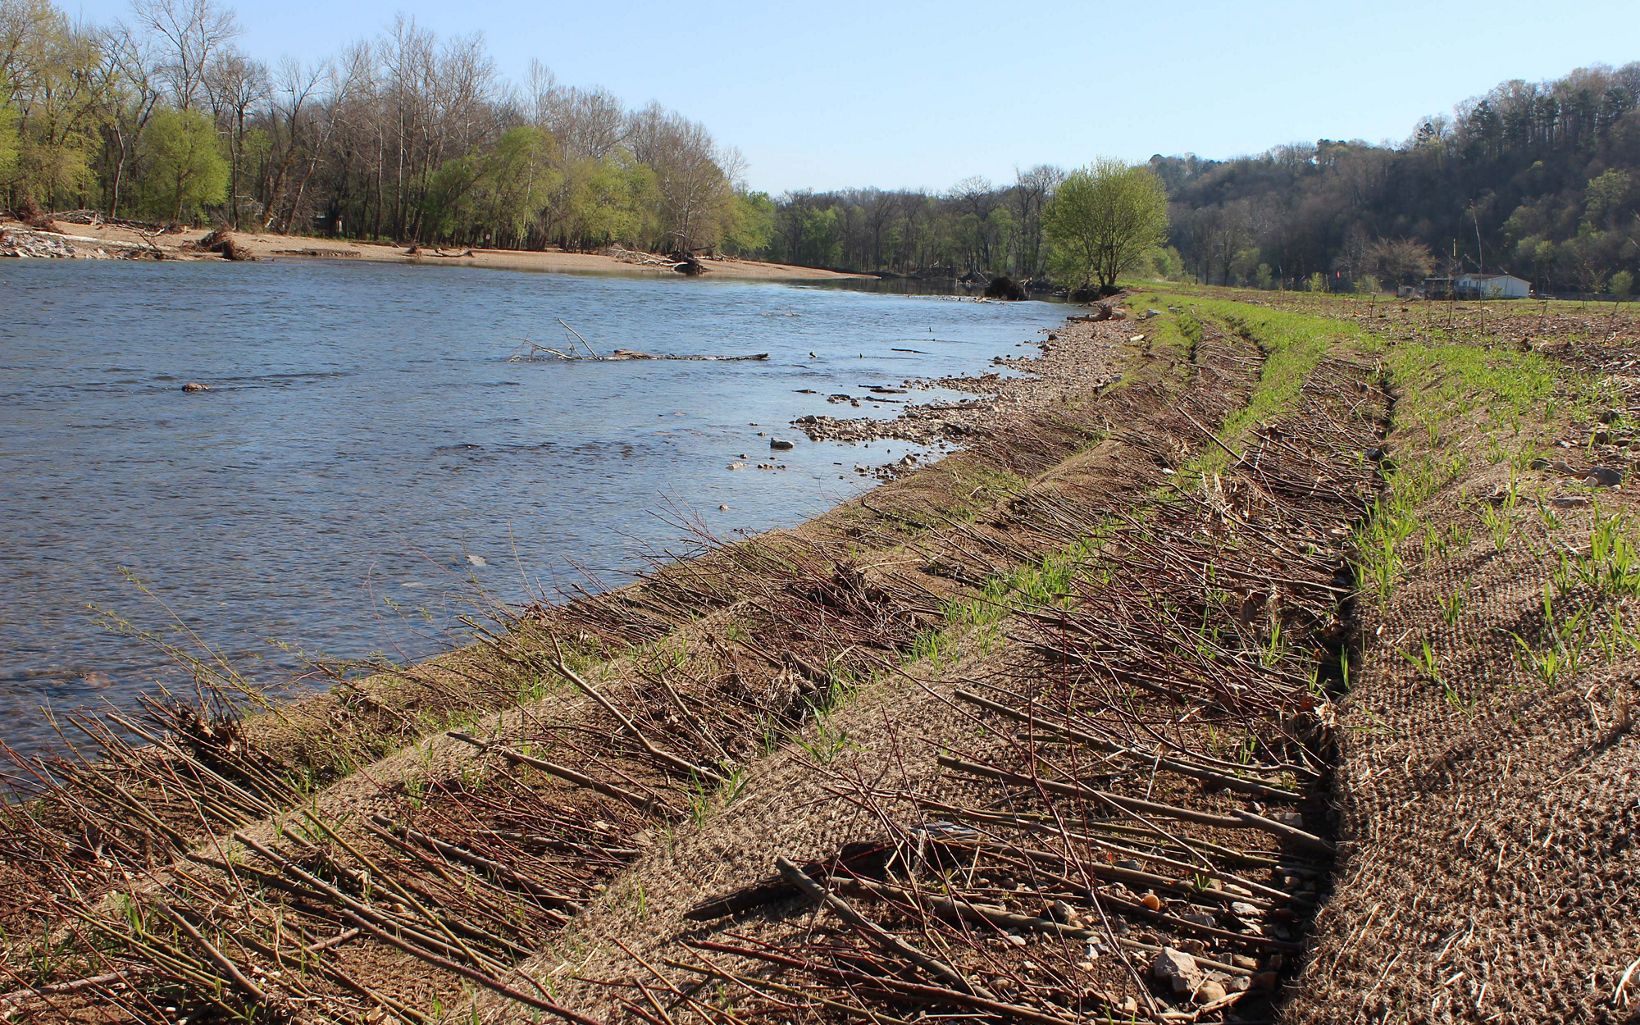 Elk River (McDonald County) In 2018, TNC and partners restored 1,650 feet of streambank along the Elk River where a landowner was losing 8,000 tons of soil every year to erosion. © Kristy Stoyer/TNC